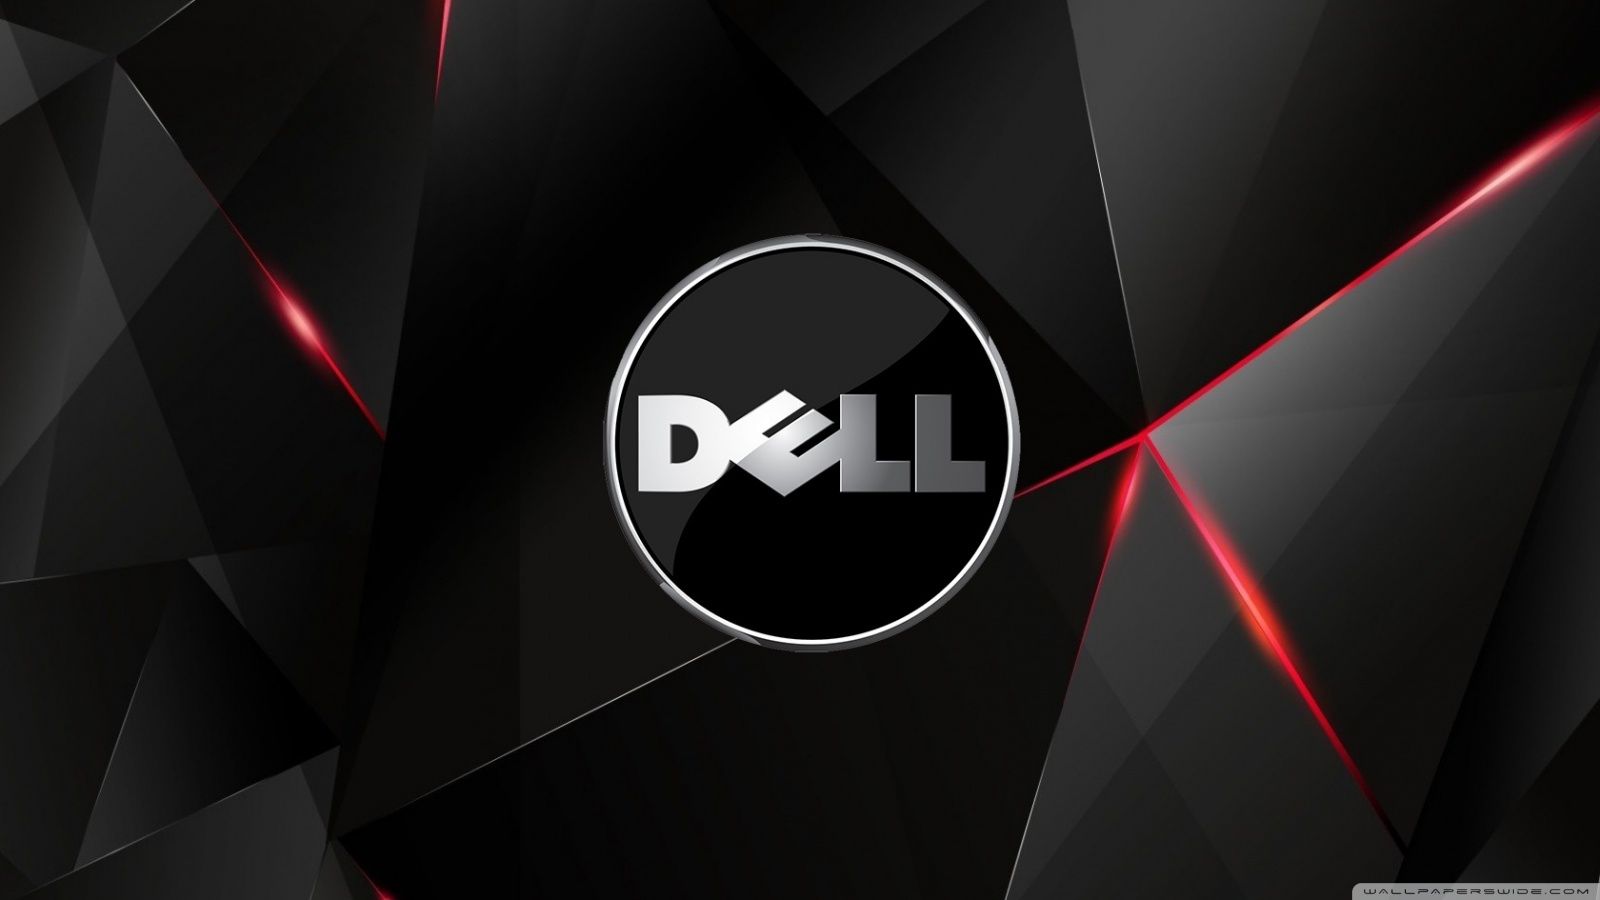 Free Download 2160p Dell Wallpapers Top 2160p Dell Backgrounds 1600x900 For Your Desktop Mobile Tablet Explore 62 Dell Backgrounds Dell Wallpapers Dell Wallpaper Dell Backgrounds